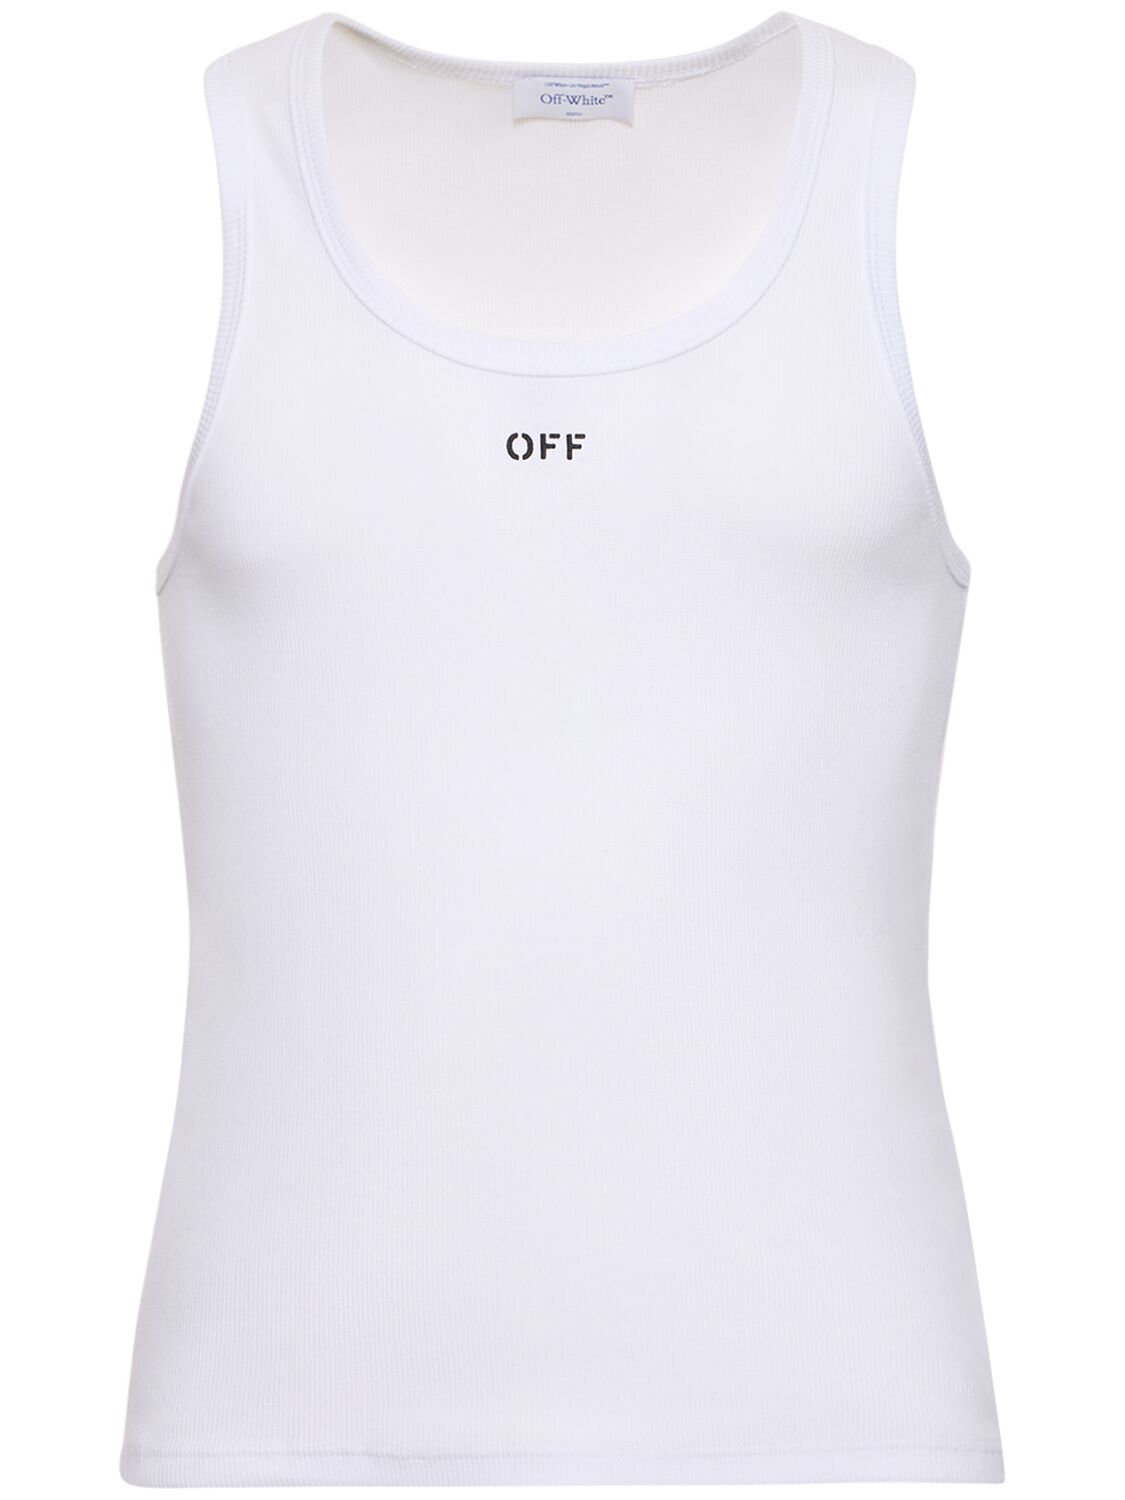 Off Stamp Cotton Blend Tank Top